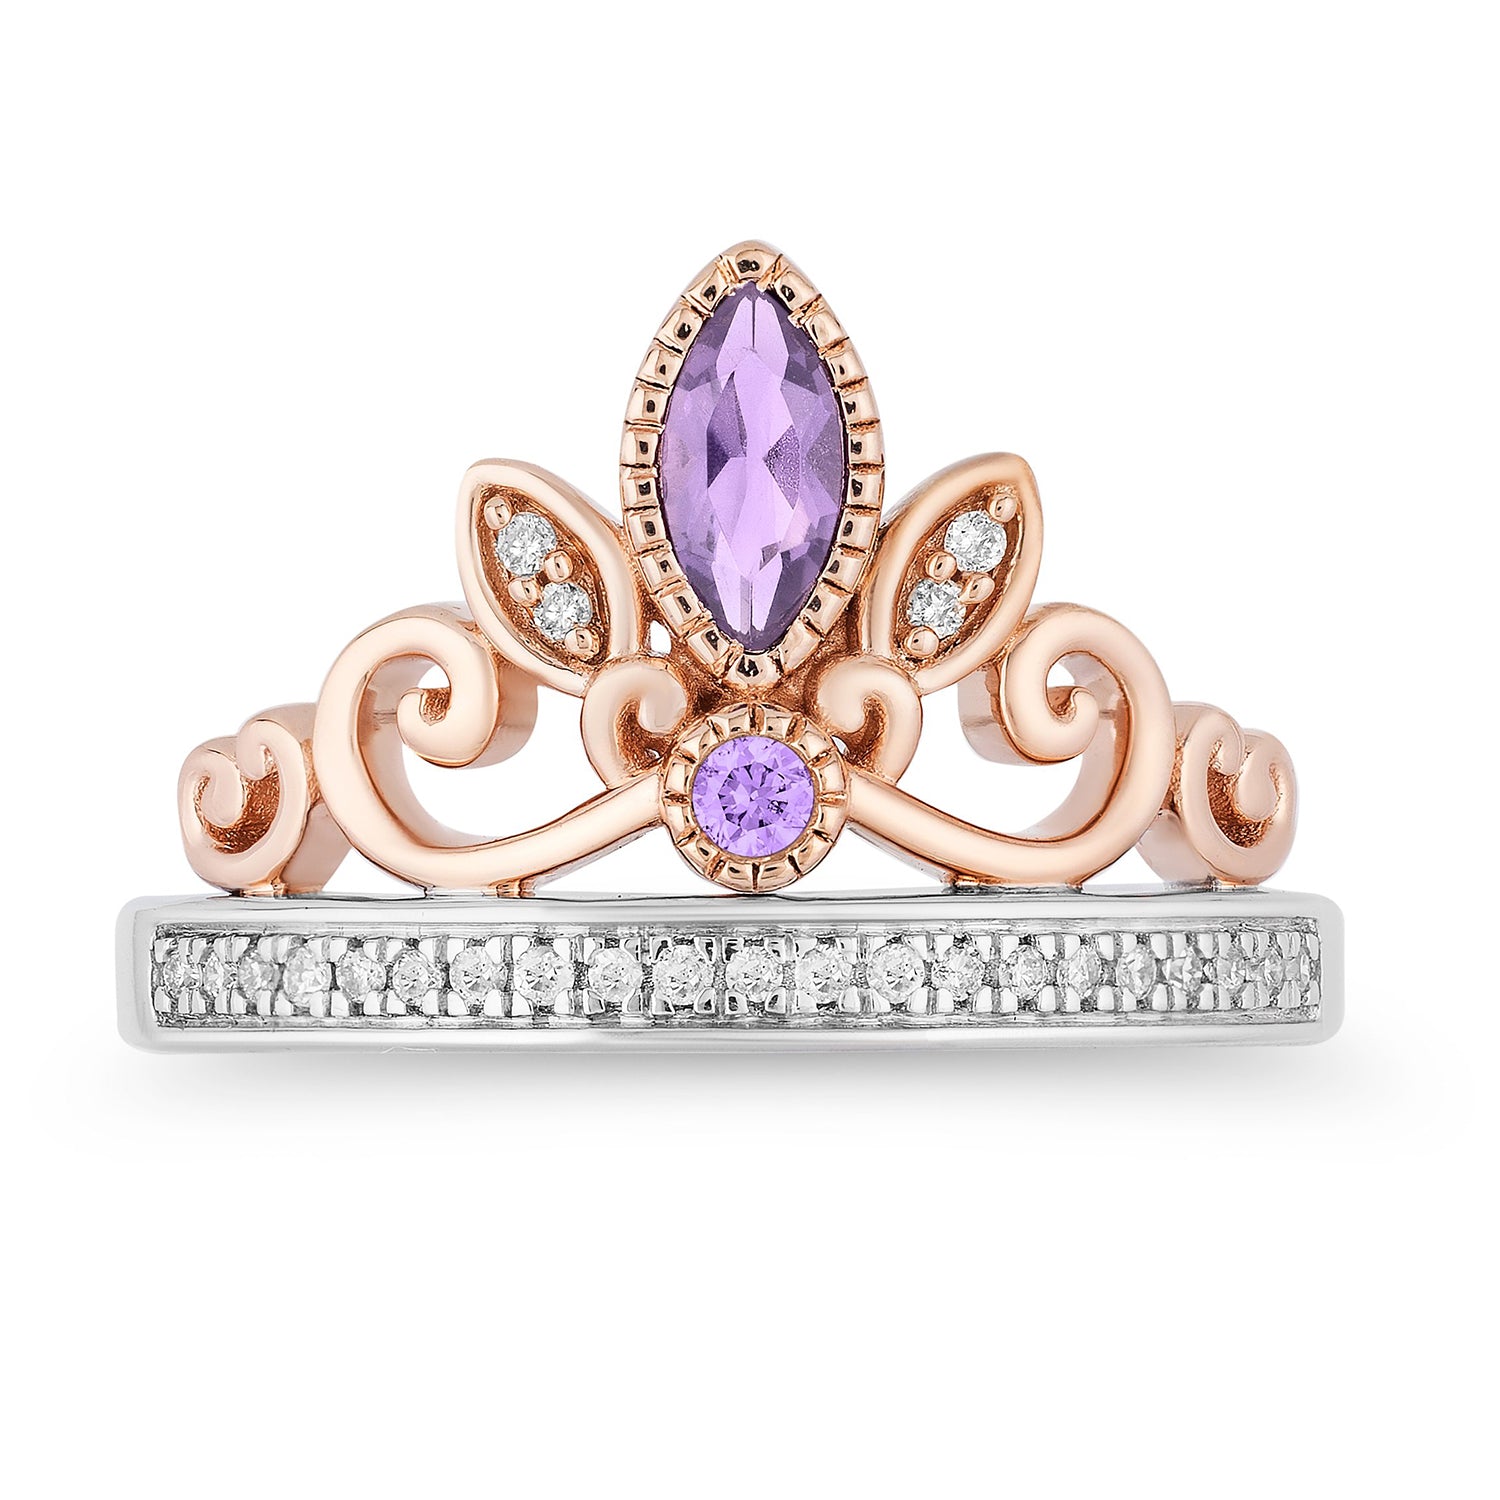 Tiara of the Month: The modern day jewellery houses that make